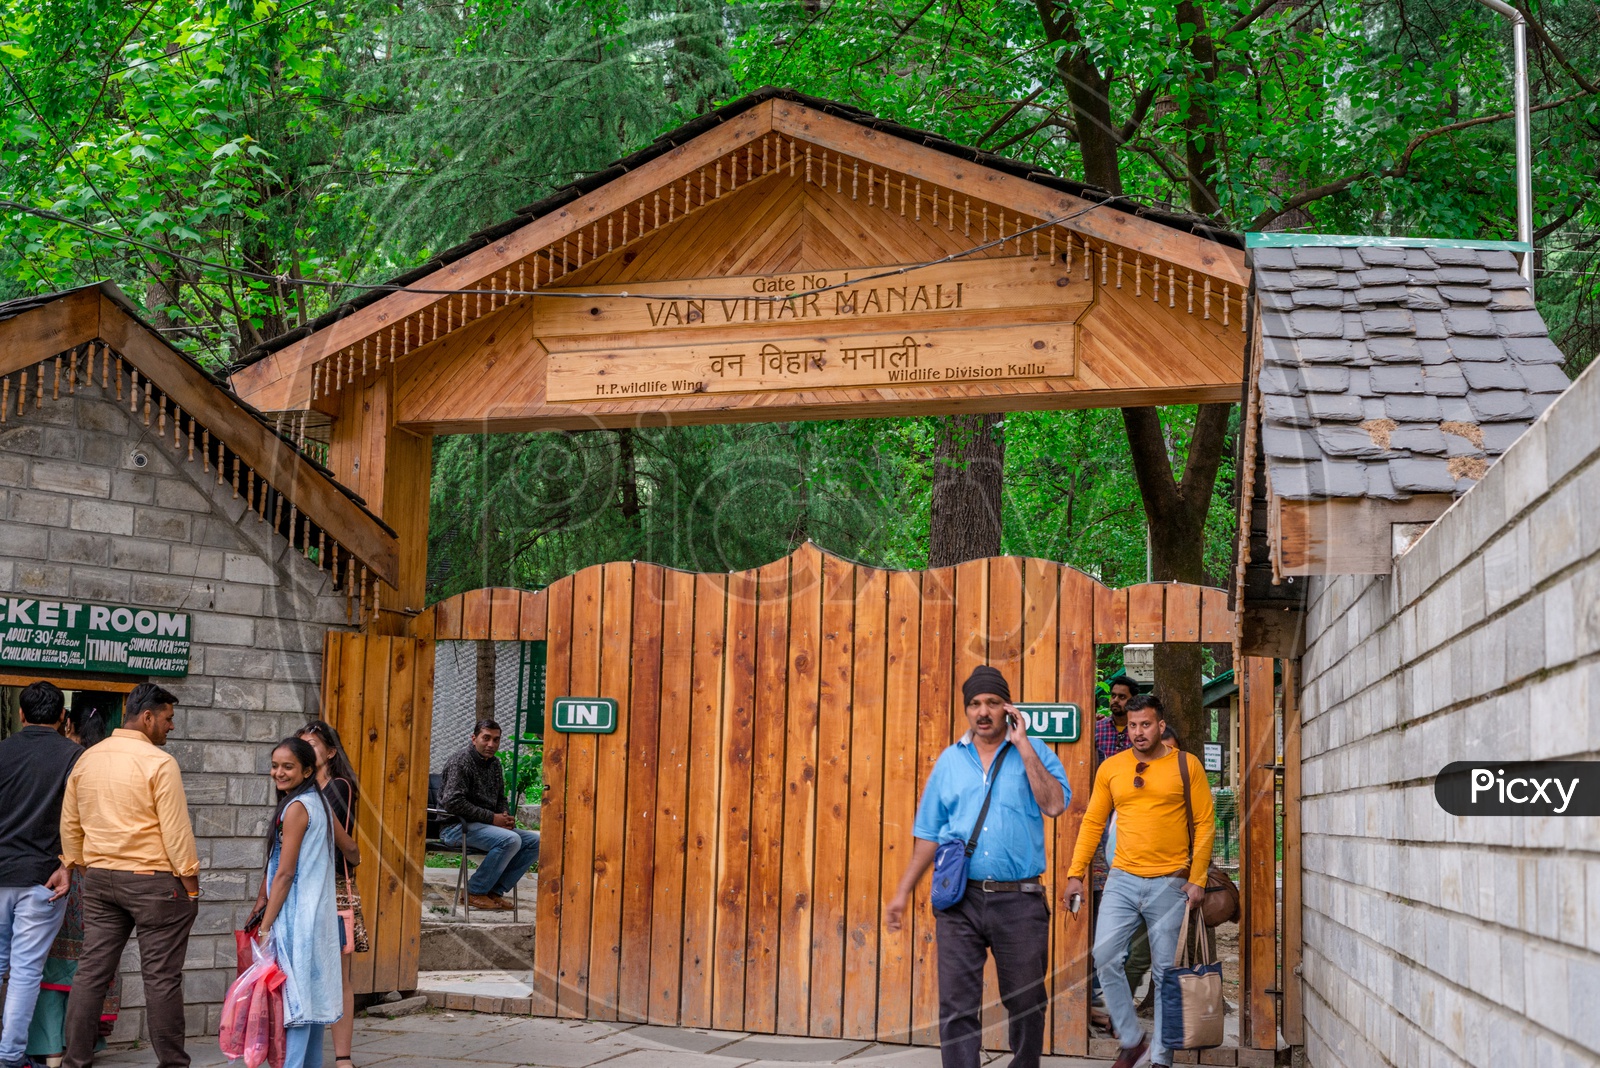 People Exiting from Main Gate Entrance to Van Vihar National Park in Manali